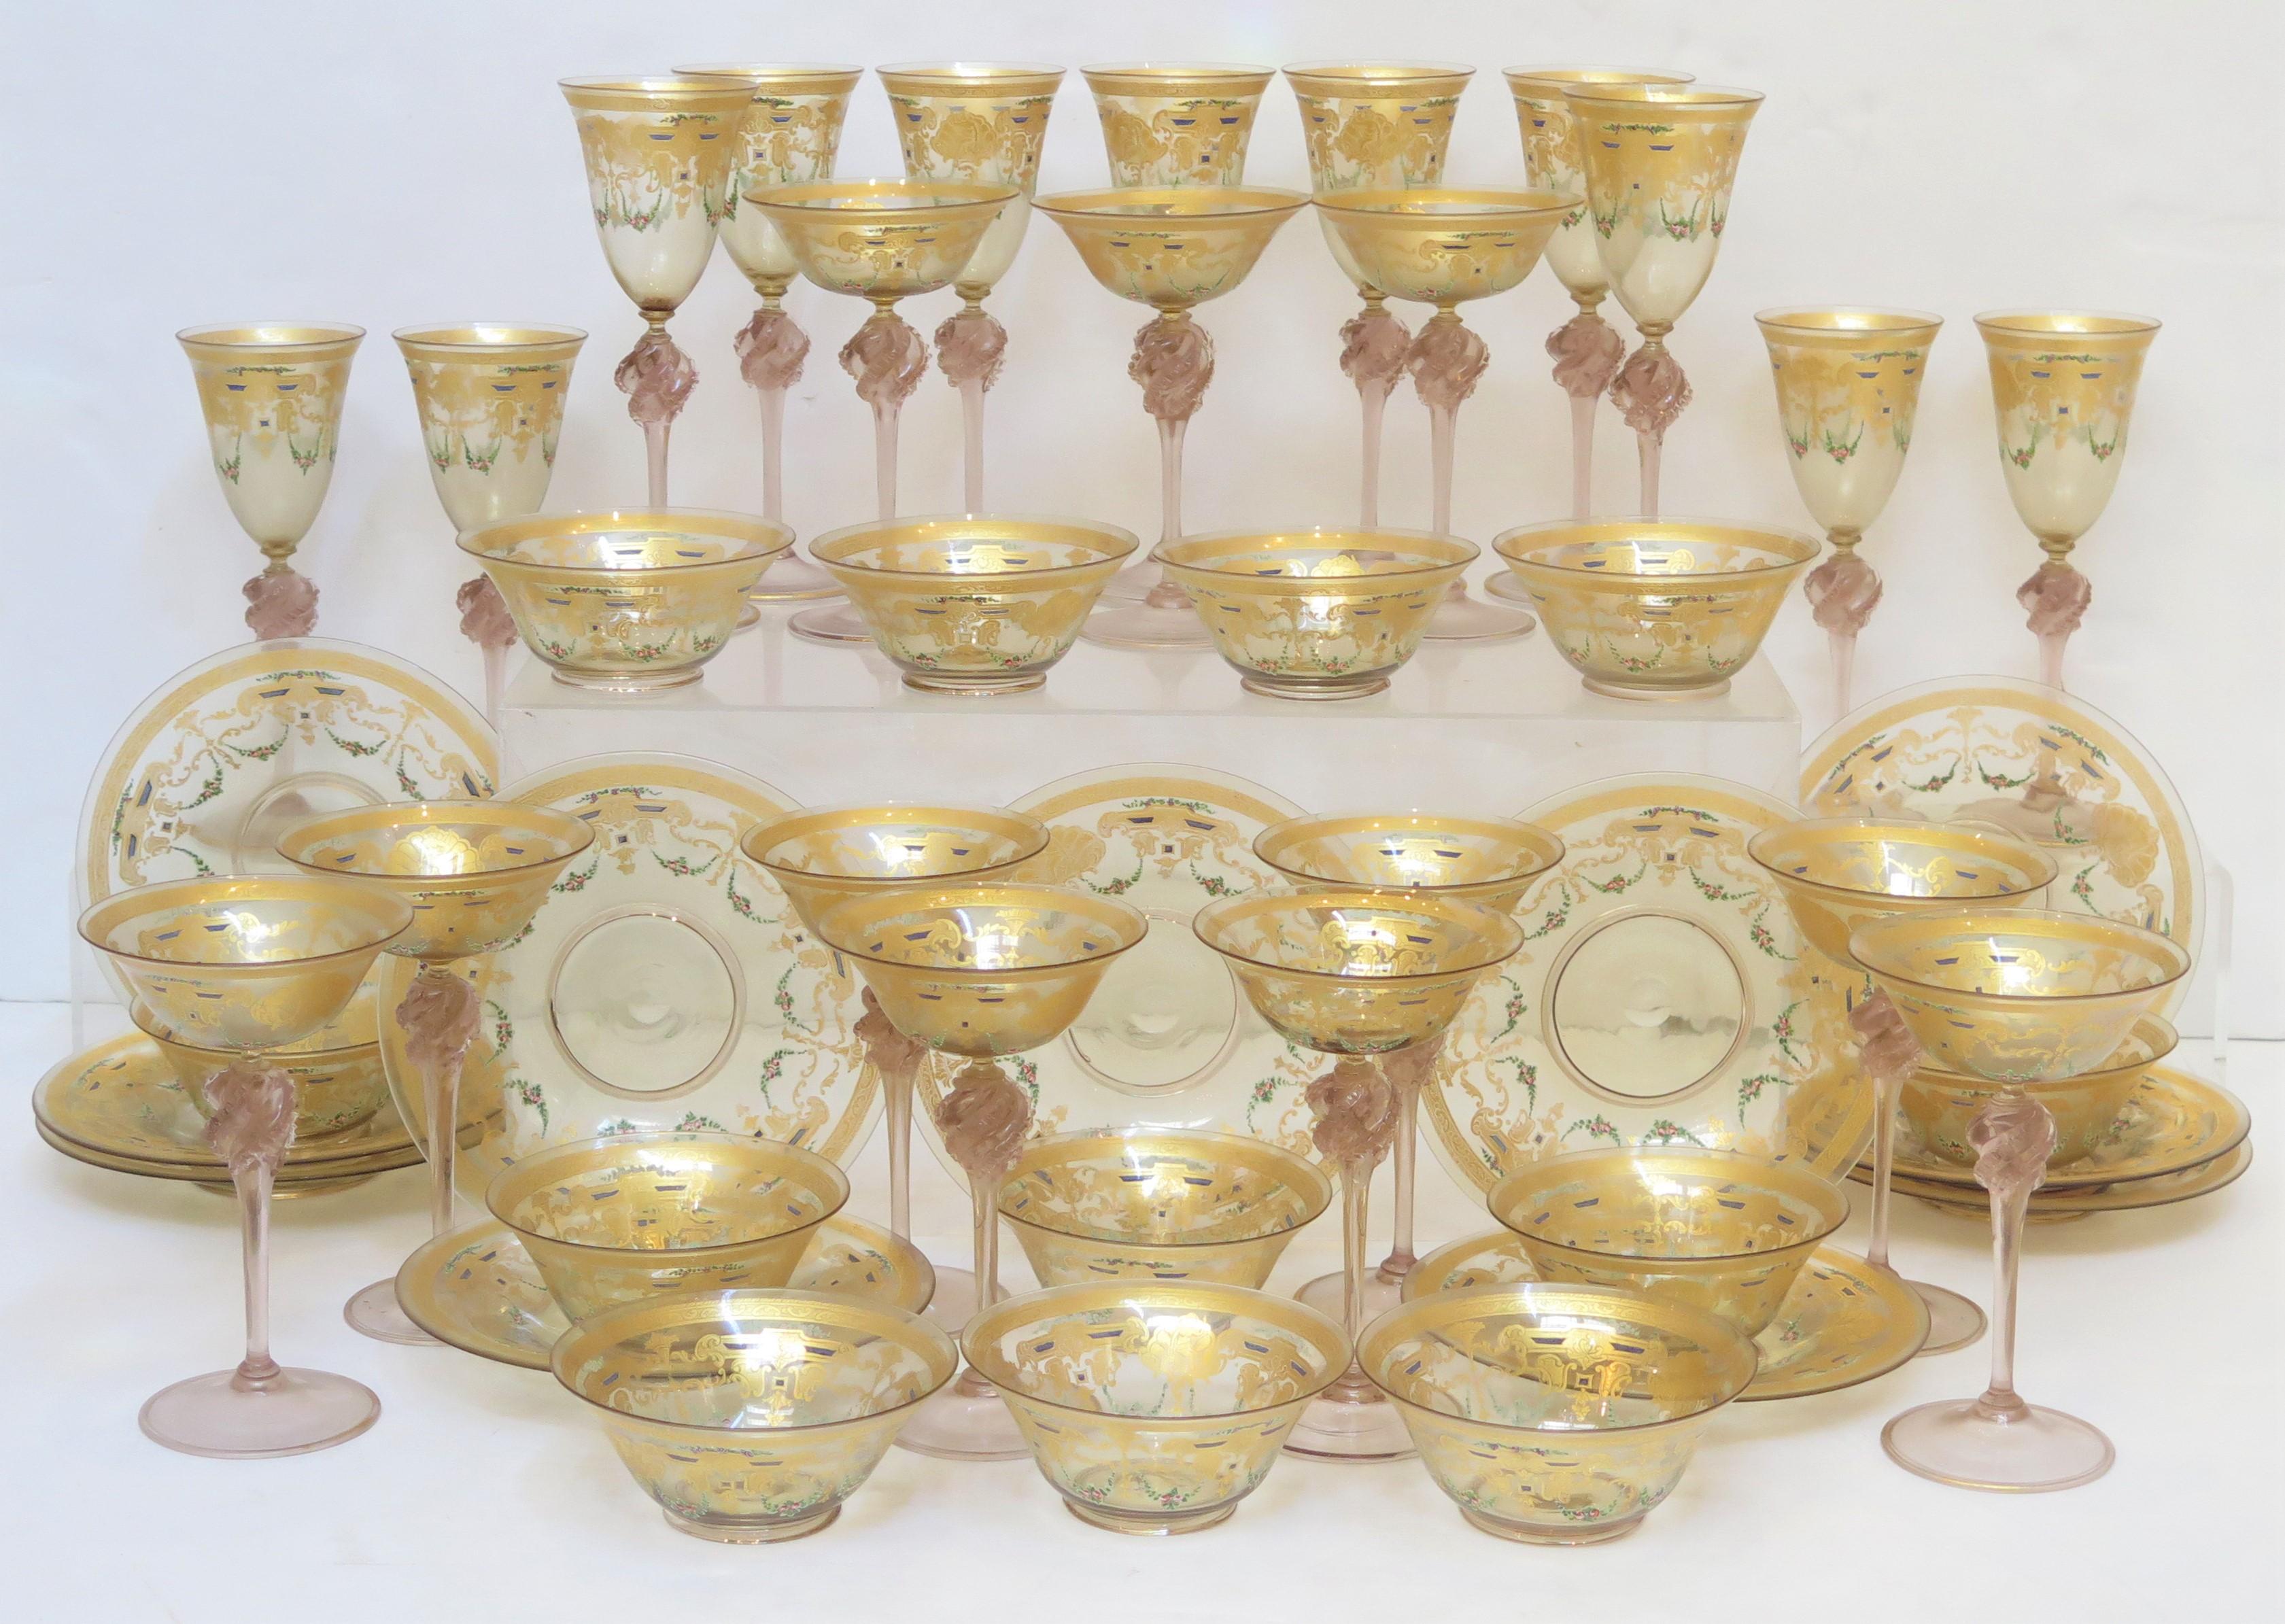 45 Group of Venetian Murano Glass Stemware with Gilt and Hand-Painted Decoration For Sale 5